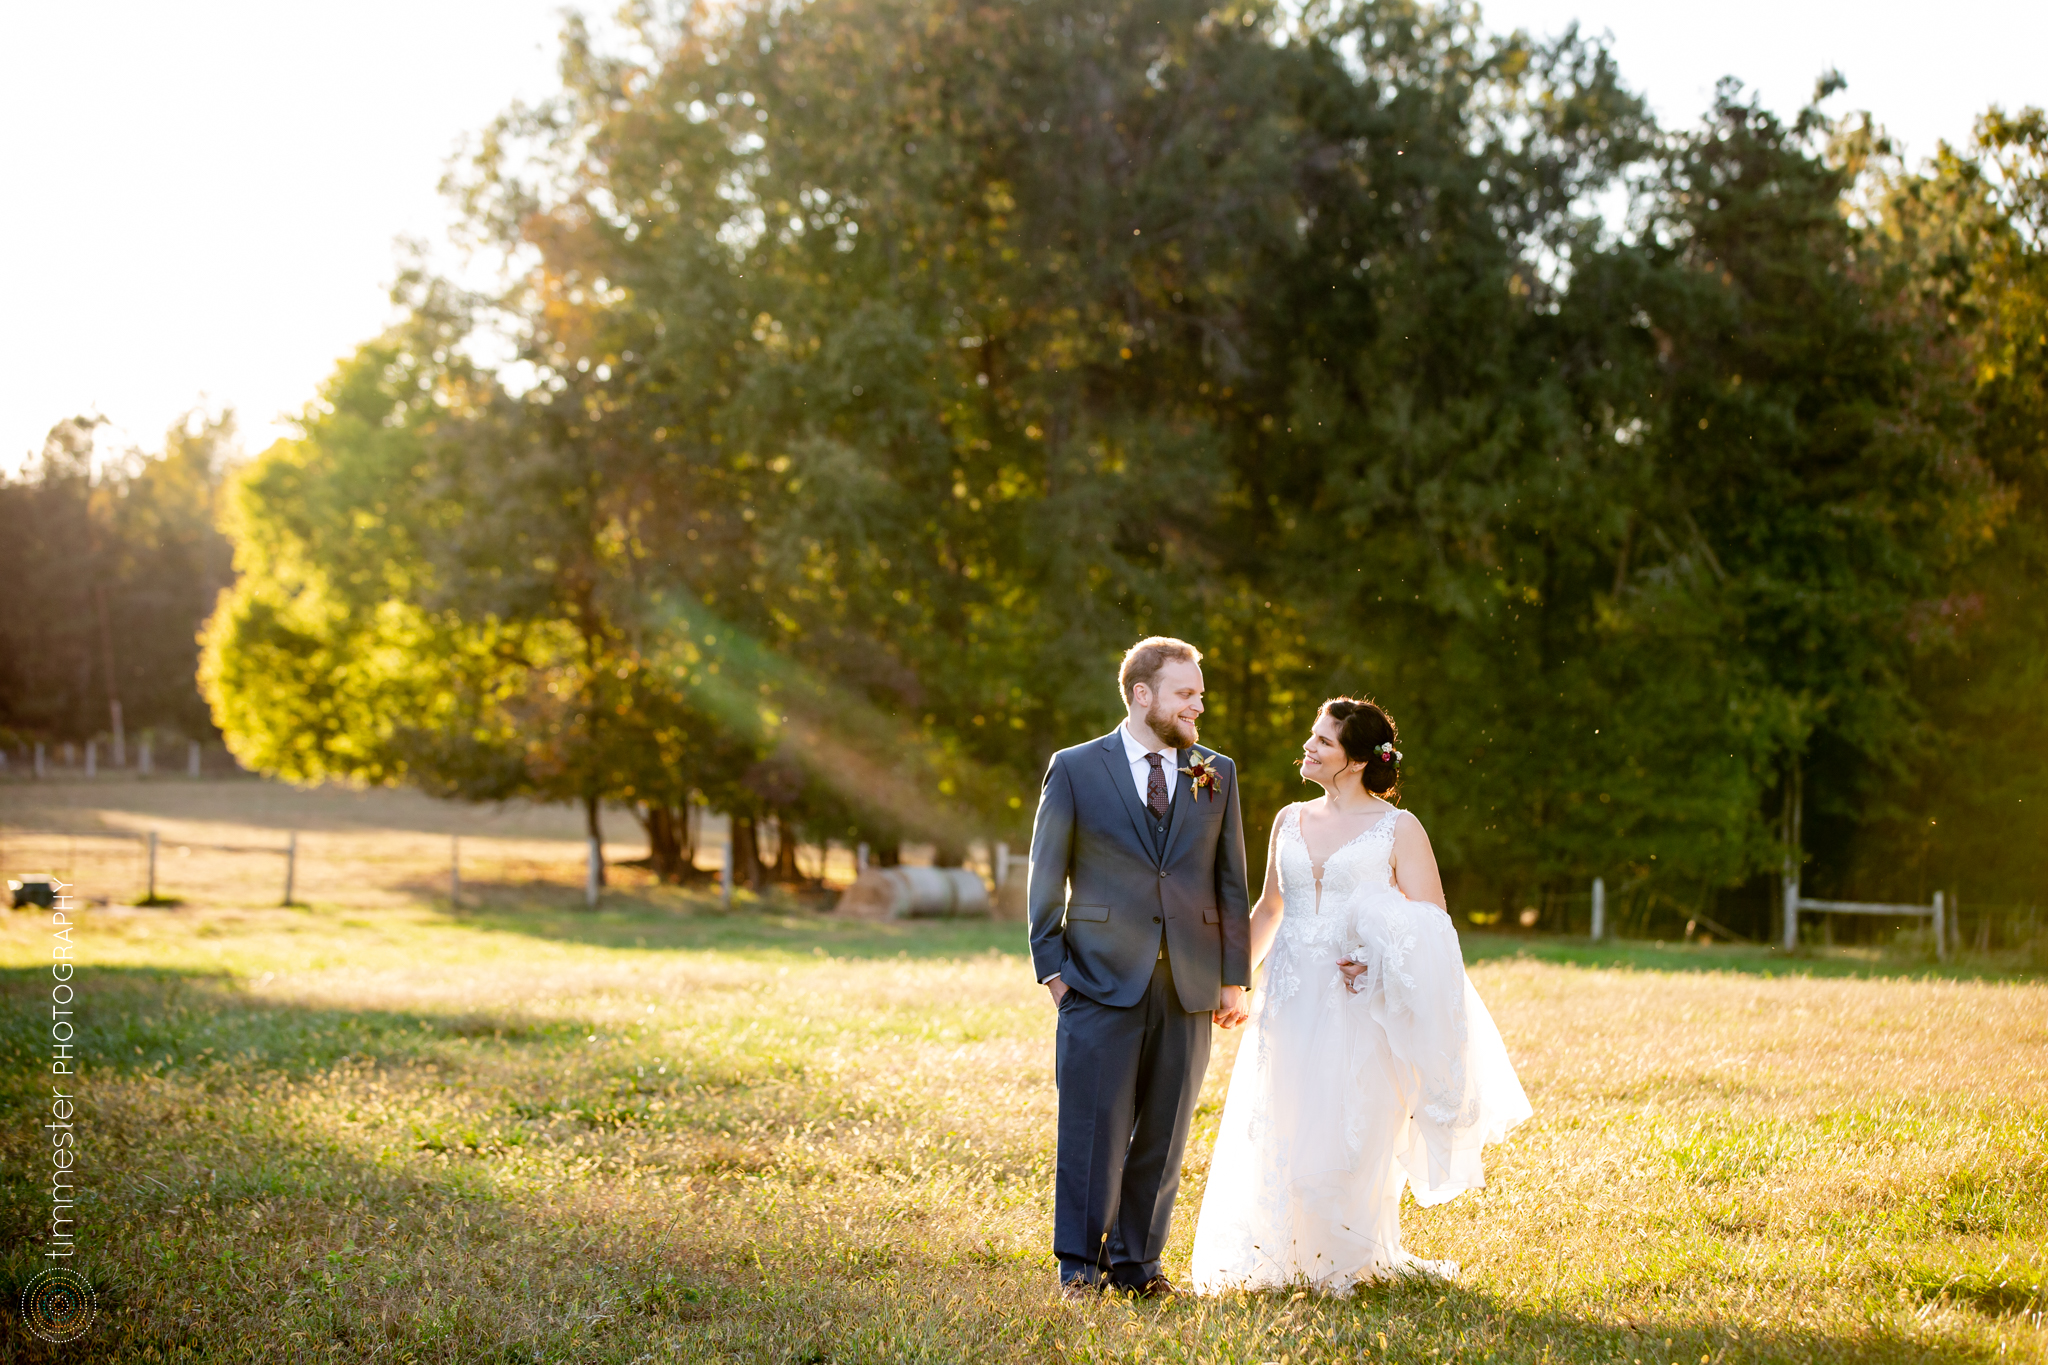 Fall outdoor rustic wedding at Sassafras Fork Farm in Rougemont, NC